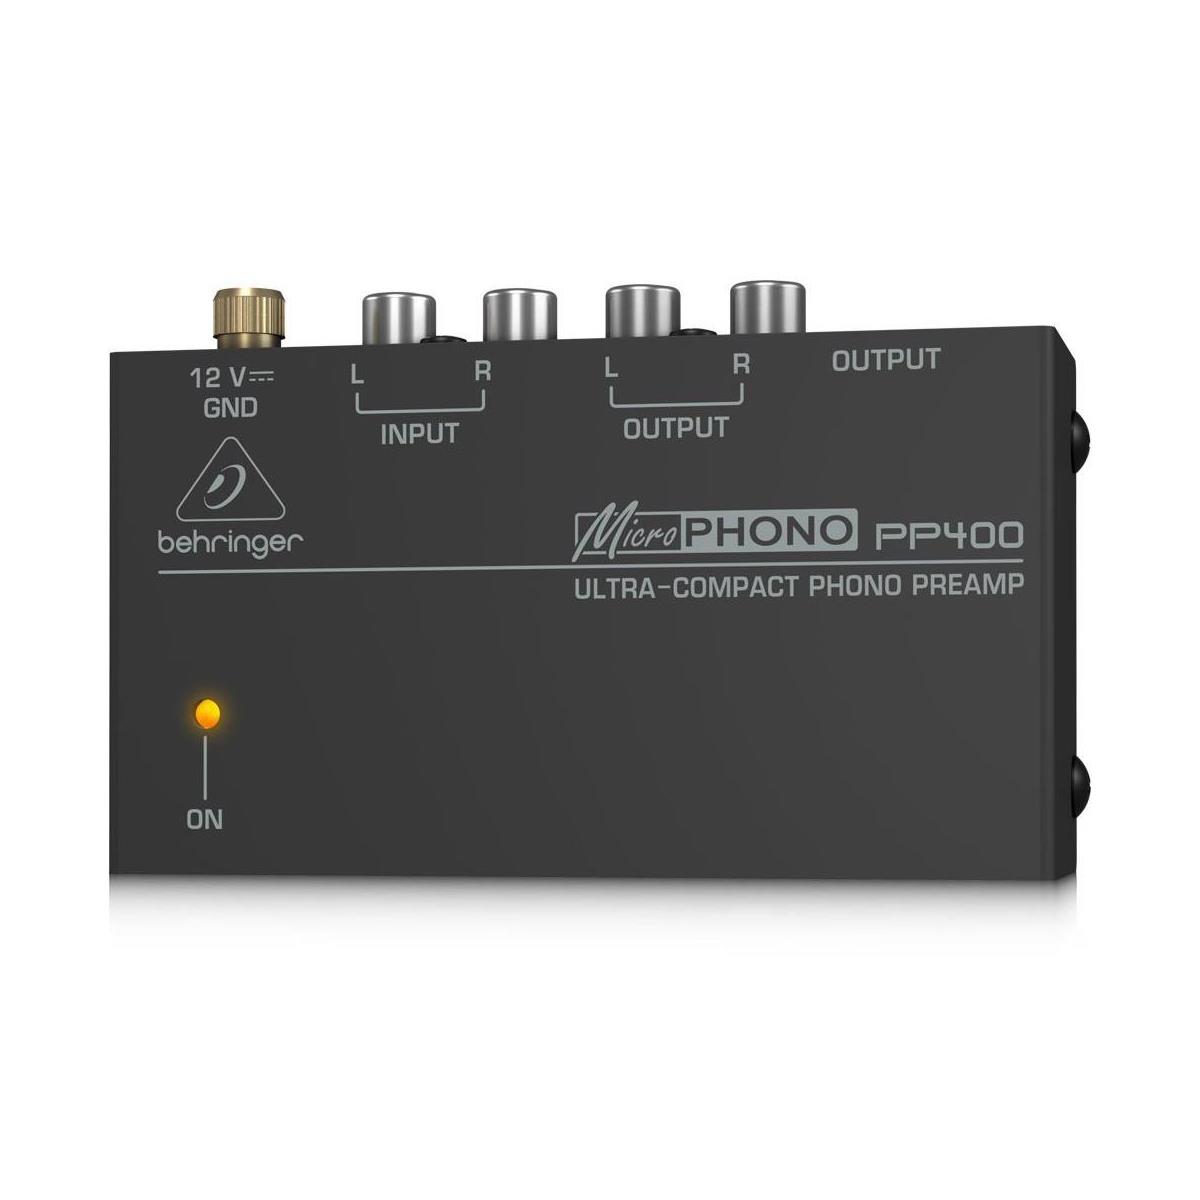 Image of Behringer Microphono PP400 Phono Preamp